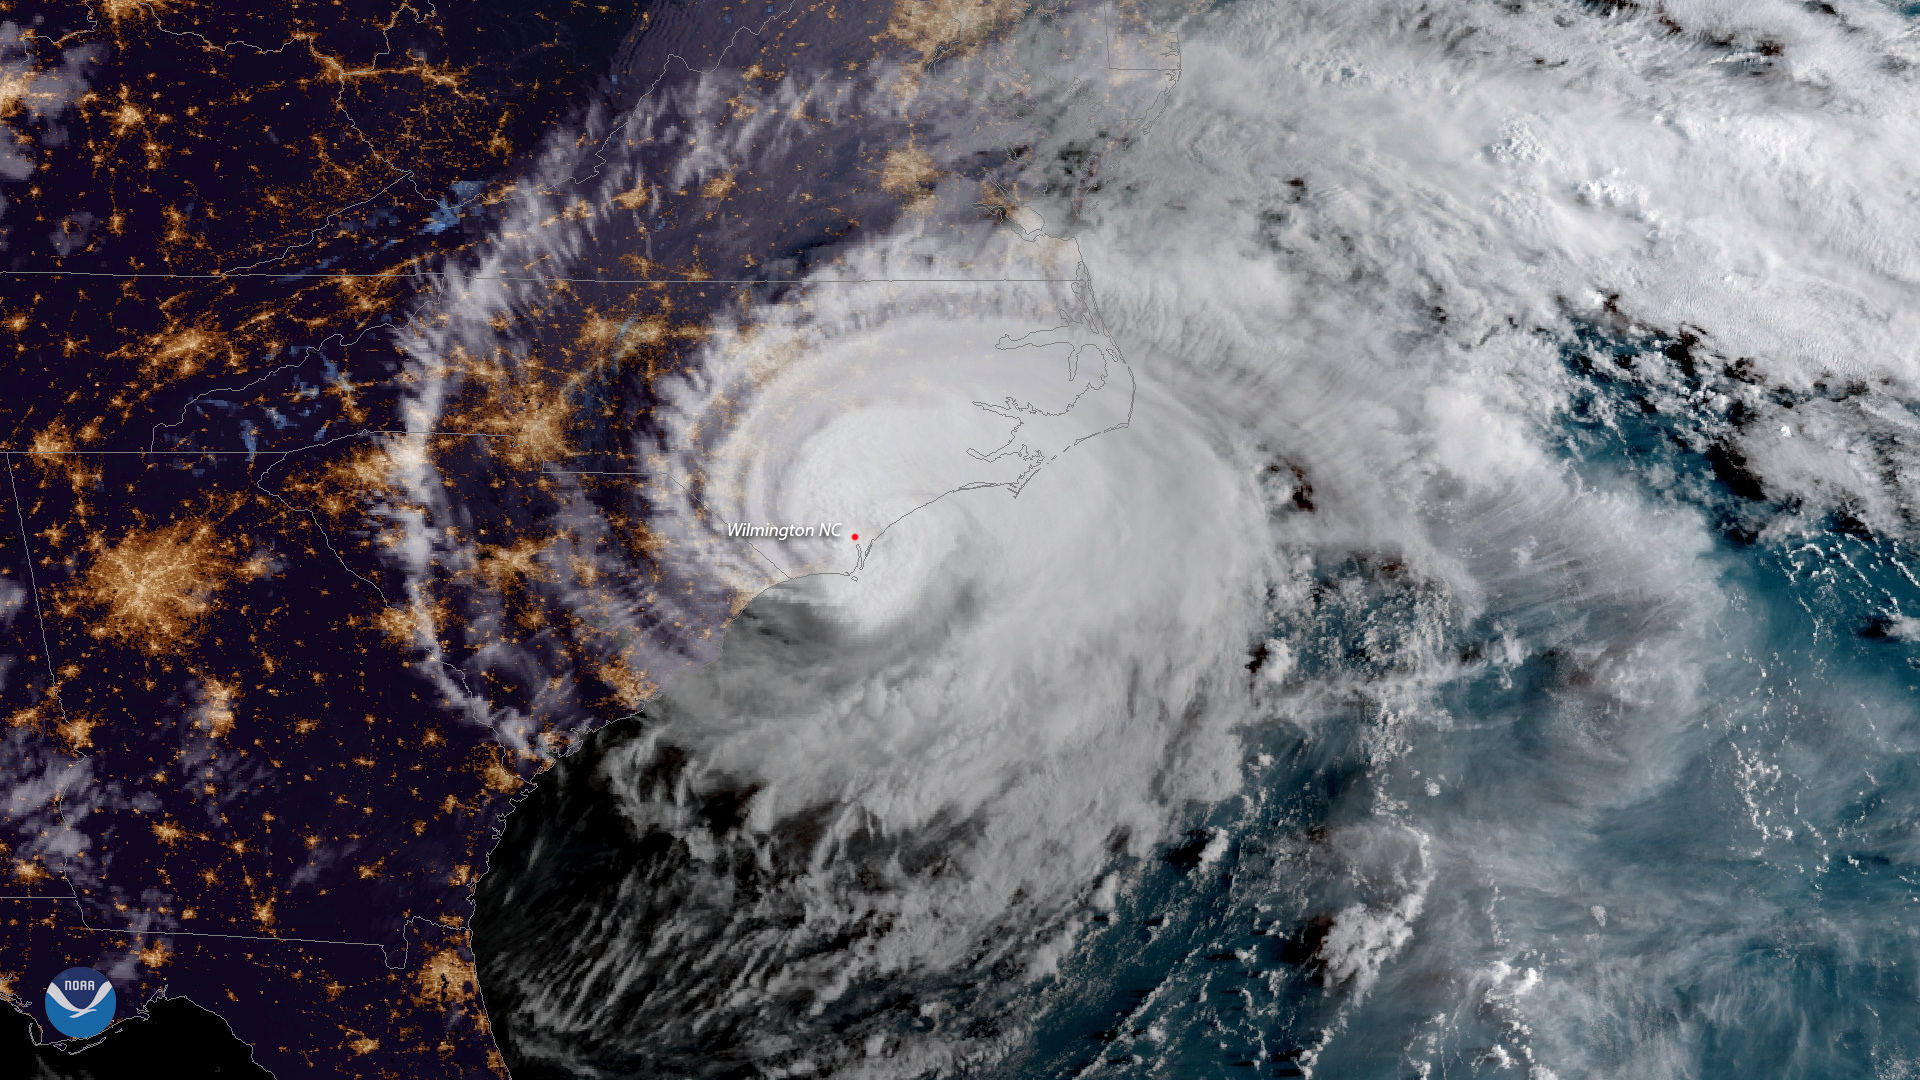 Handout photo of Hurricane Florence is shown from a National Oceanic and Atmospheric Administration (NOAA) #GOESEast satellite shortly after the storm made landfall near Wrightsville Beach, North Carolina